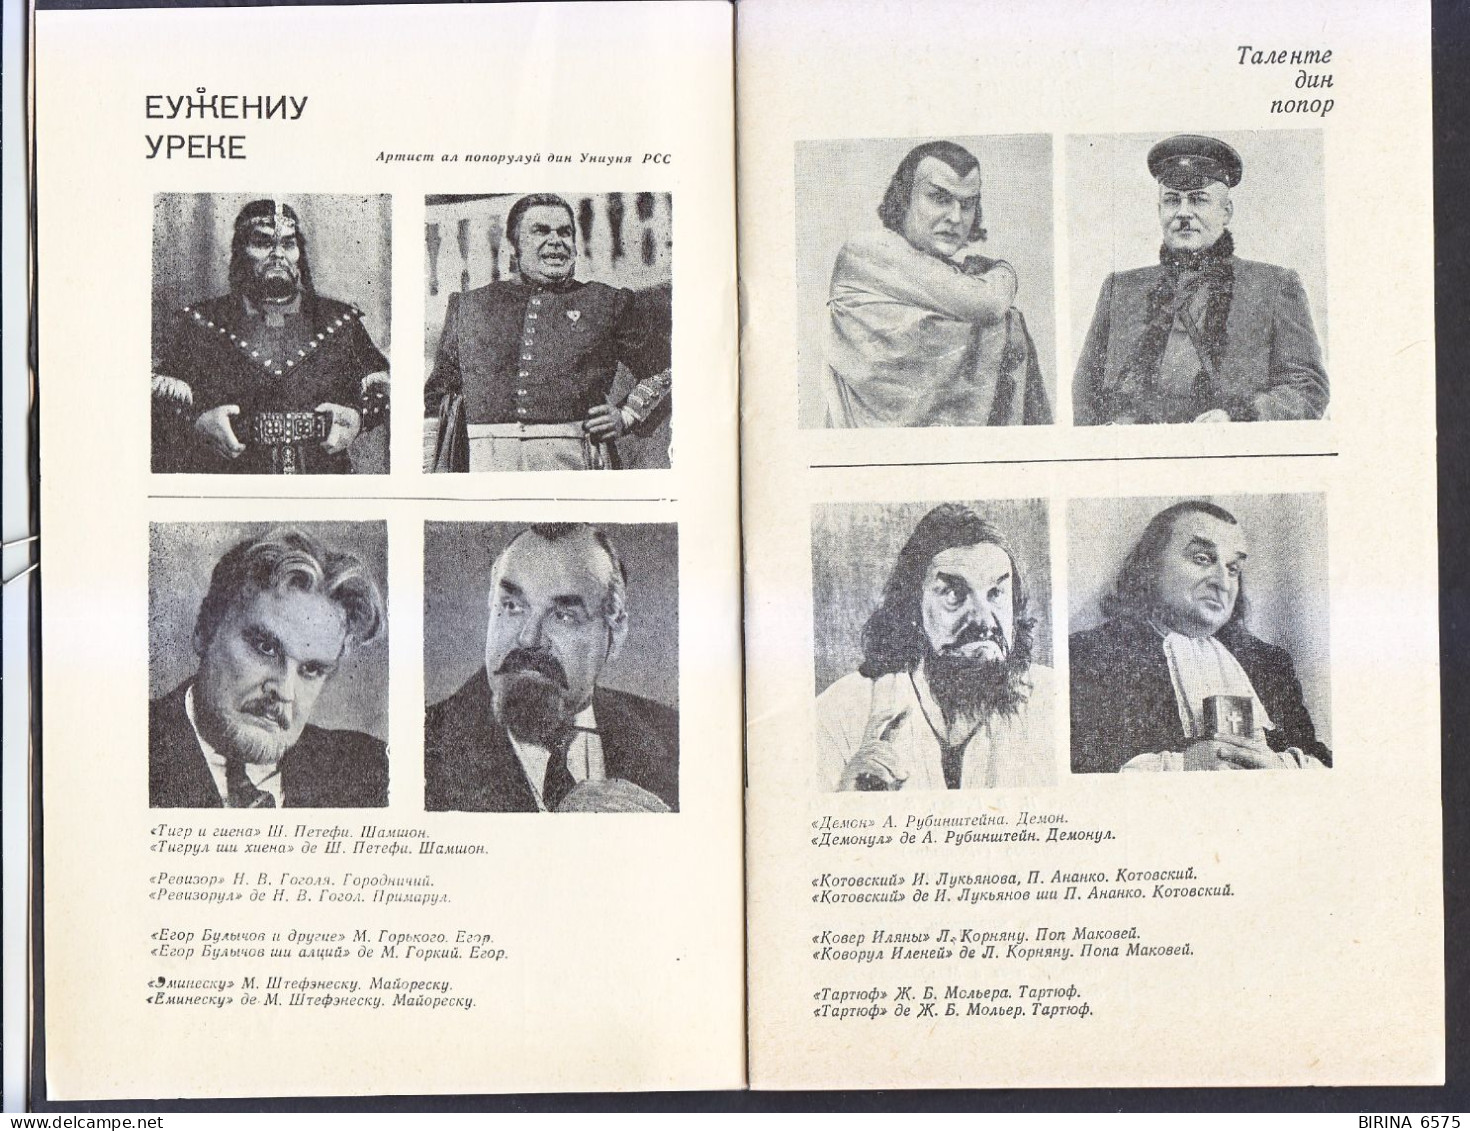 BROCHURE. PEOPLE'S ARTIST OF THE USSR. E. UREKE. CHISINAU. IN RUSSIAN AND MOLDOVAN. - 7-30-i - Theater